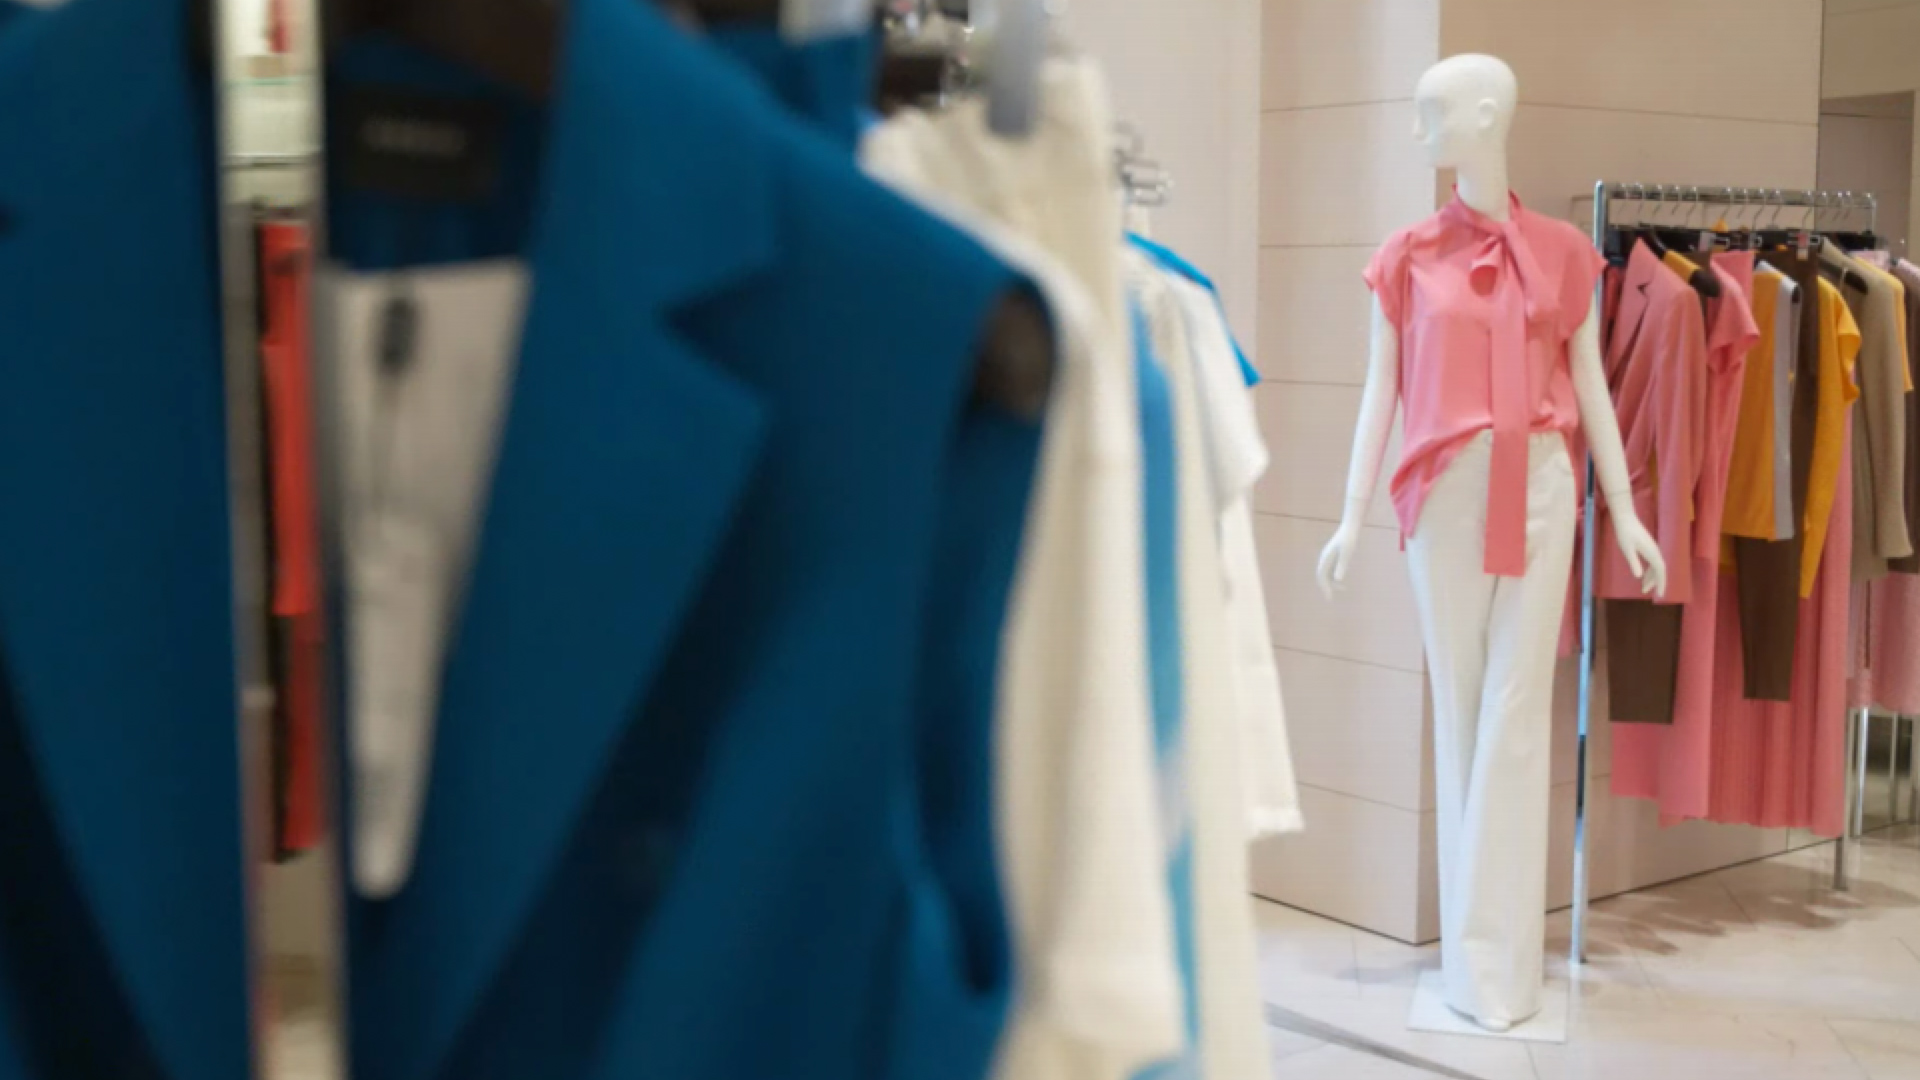 A History of Shopping in The Palm Beaches - The Palm Beaches TV